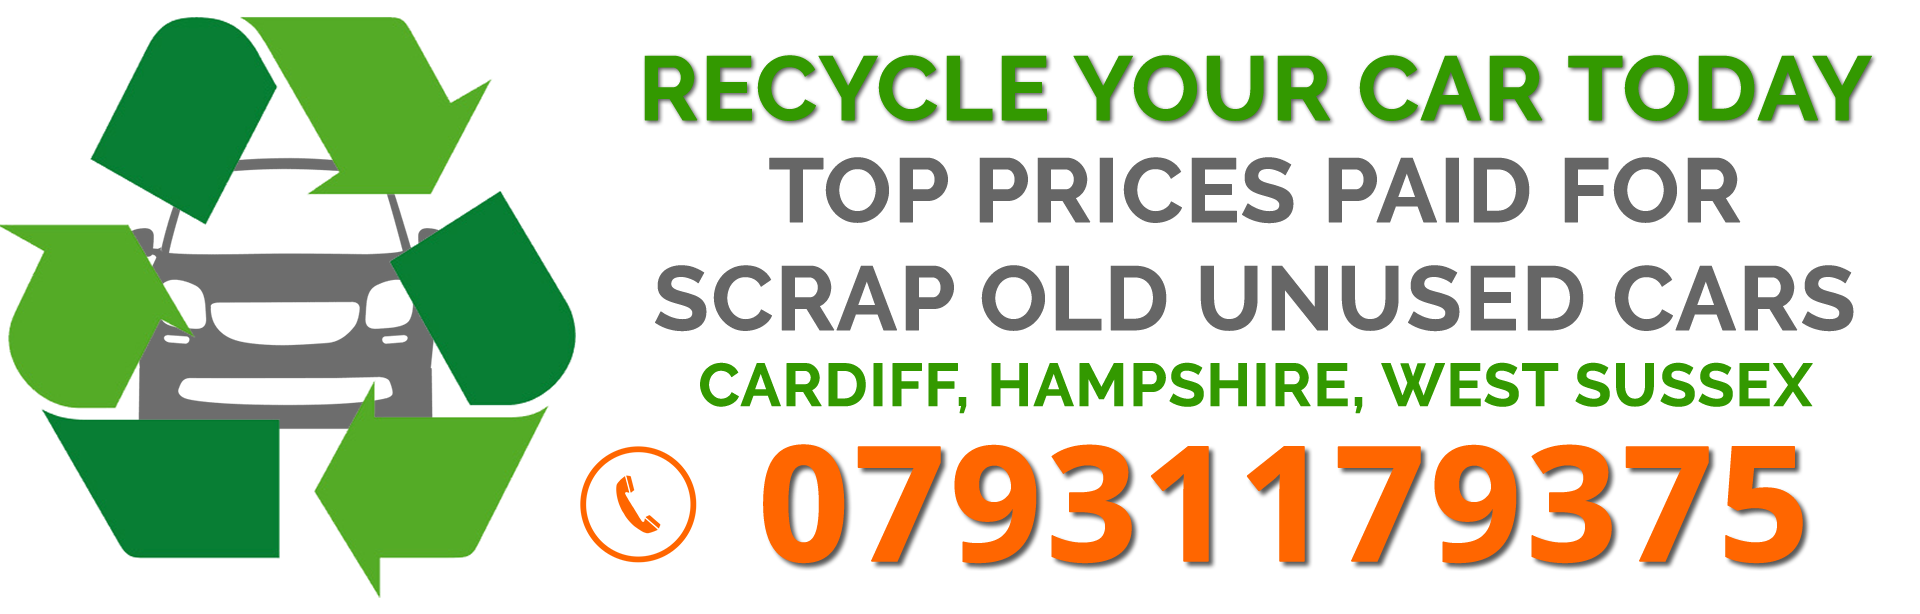 Scrap my car in West Sussex - Best Prices Paid